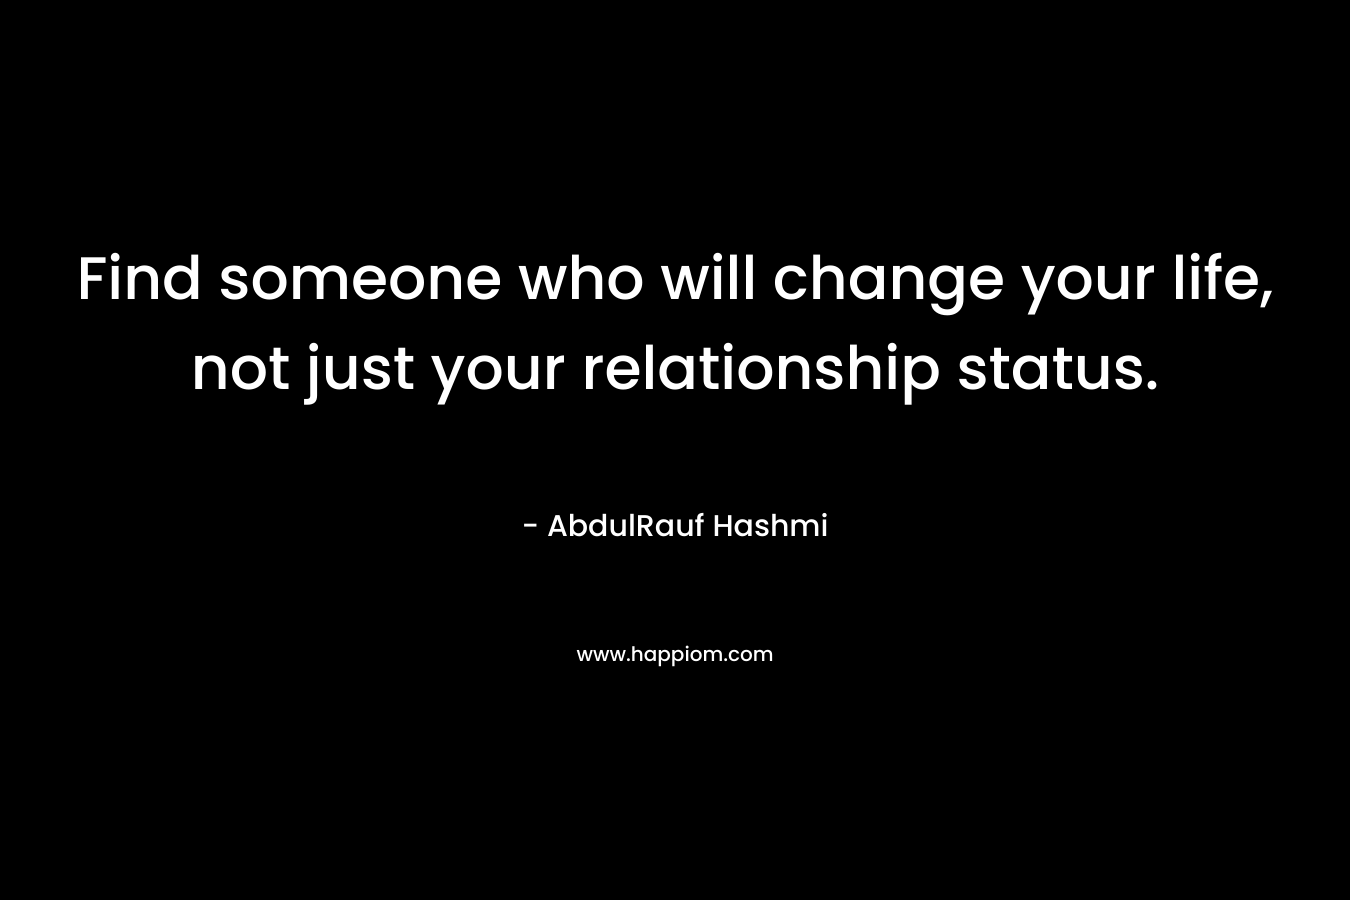 Find someone who will change your life, not just your relationship status.